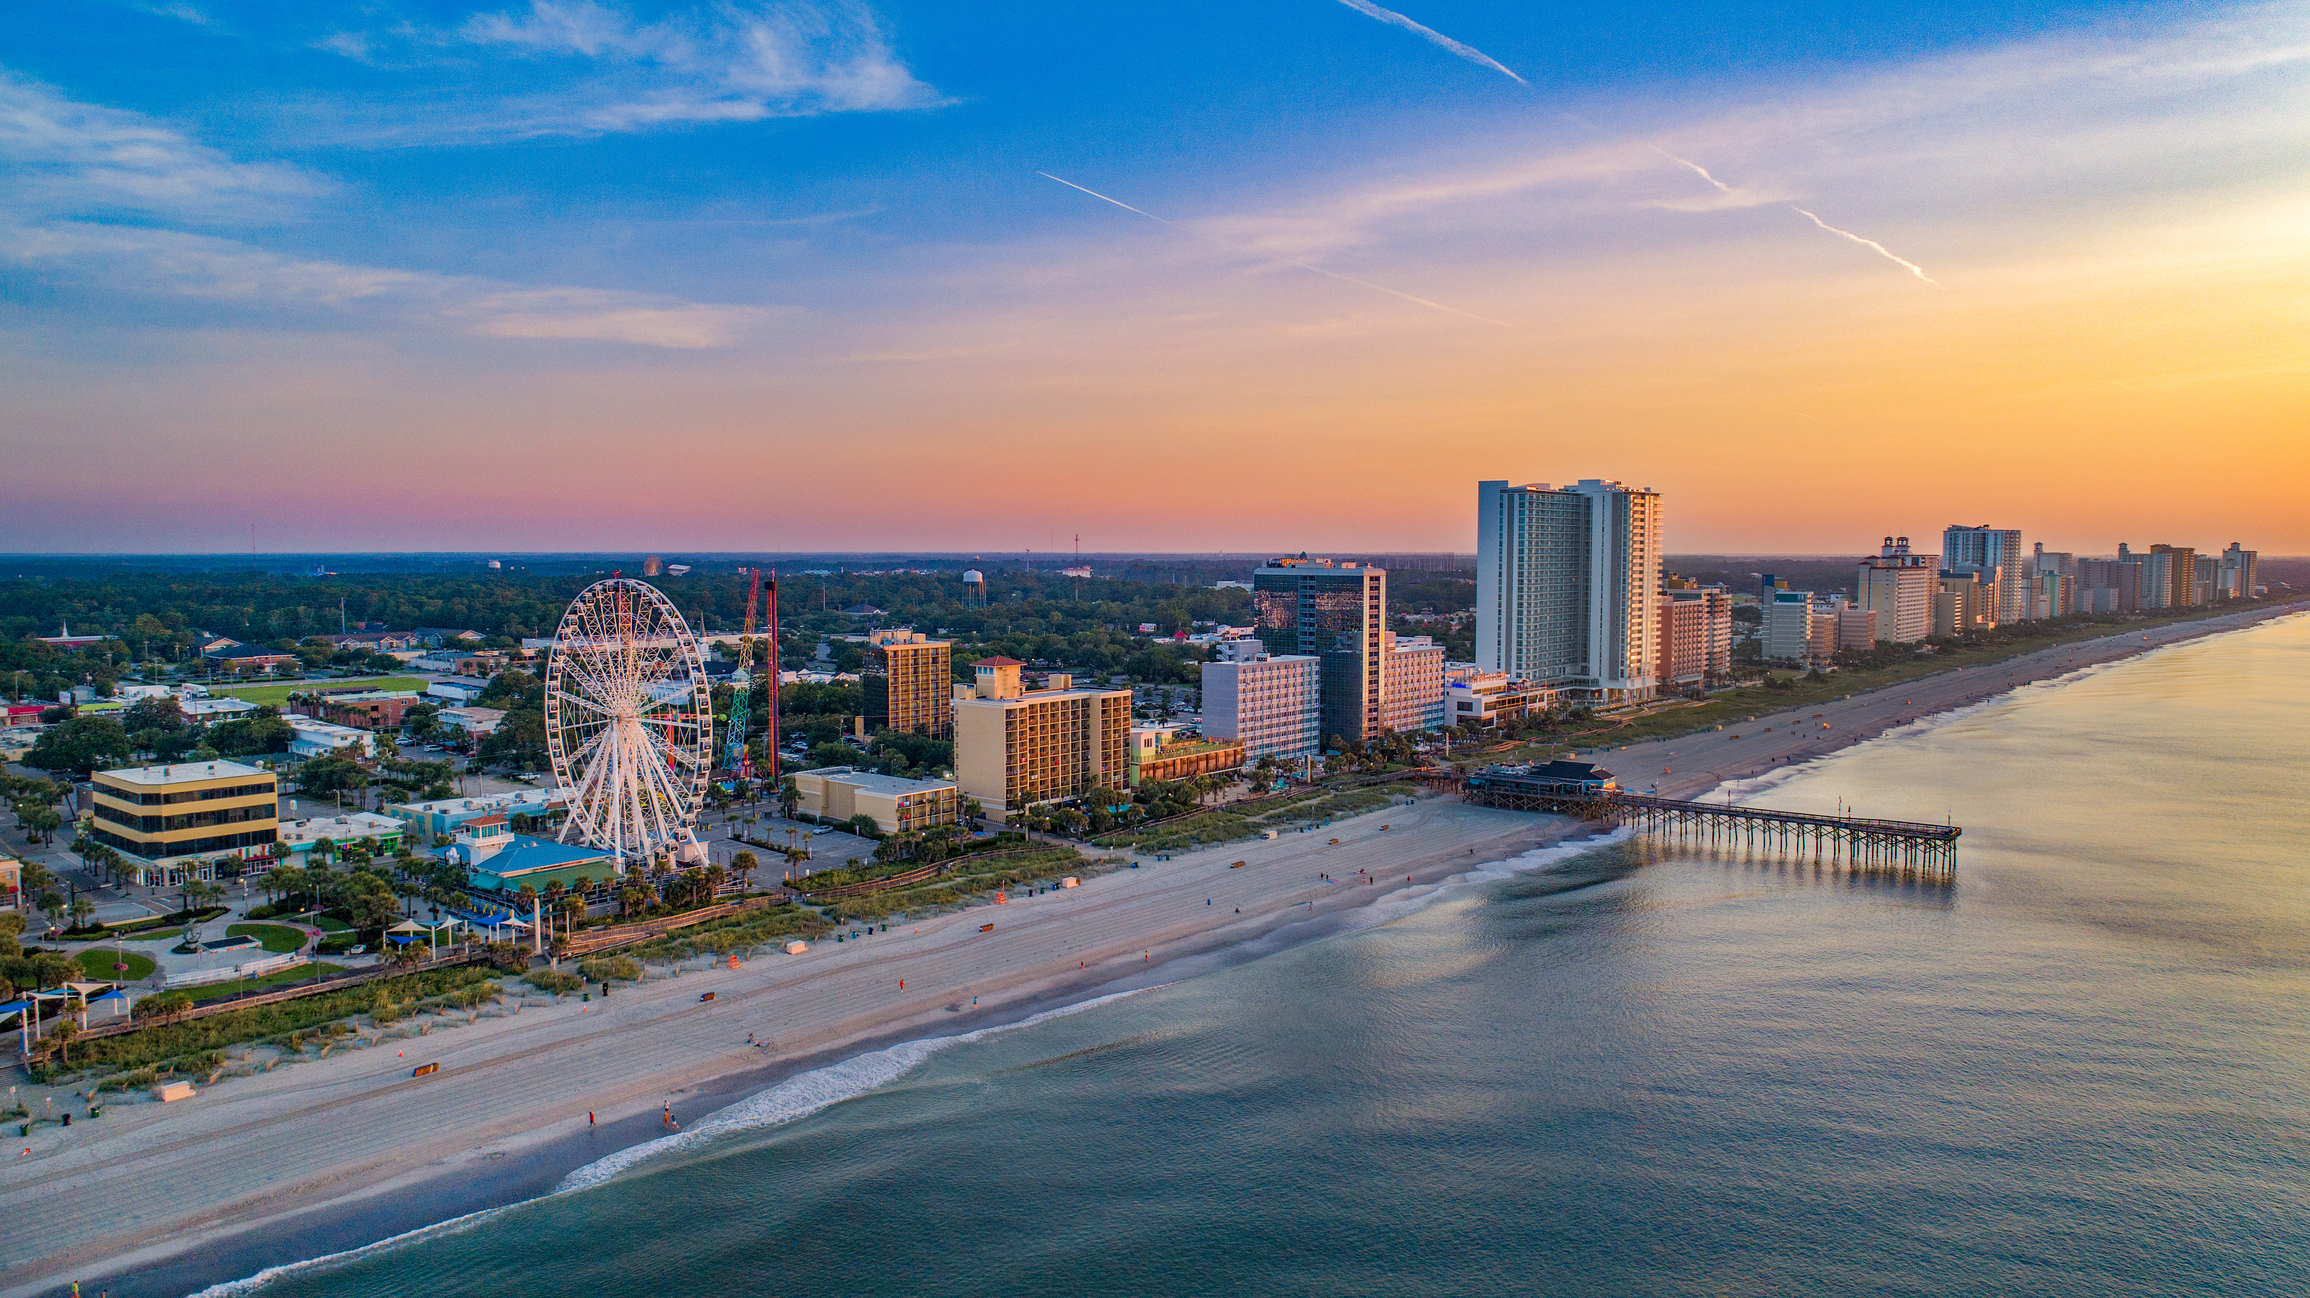 Myrtle beach sites to see